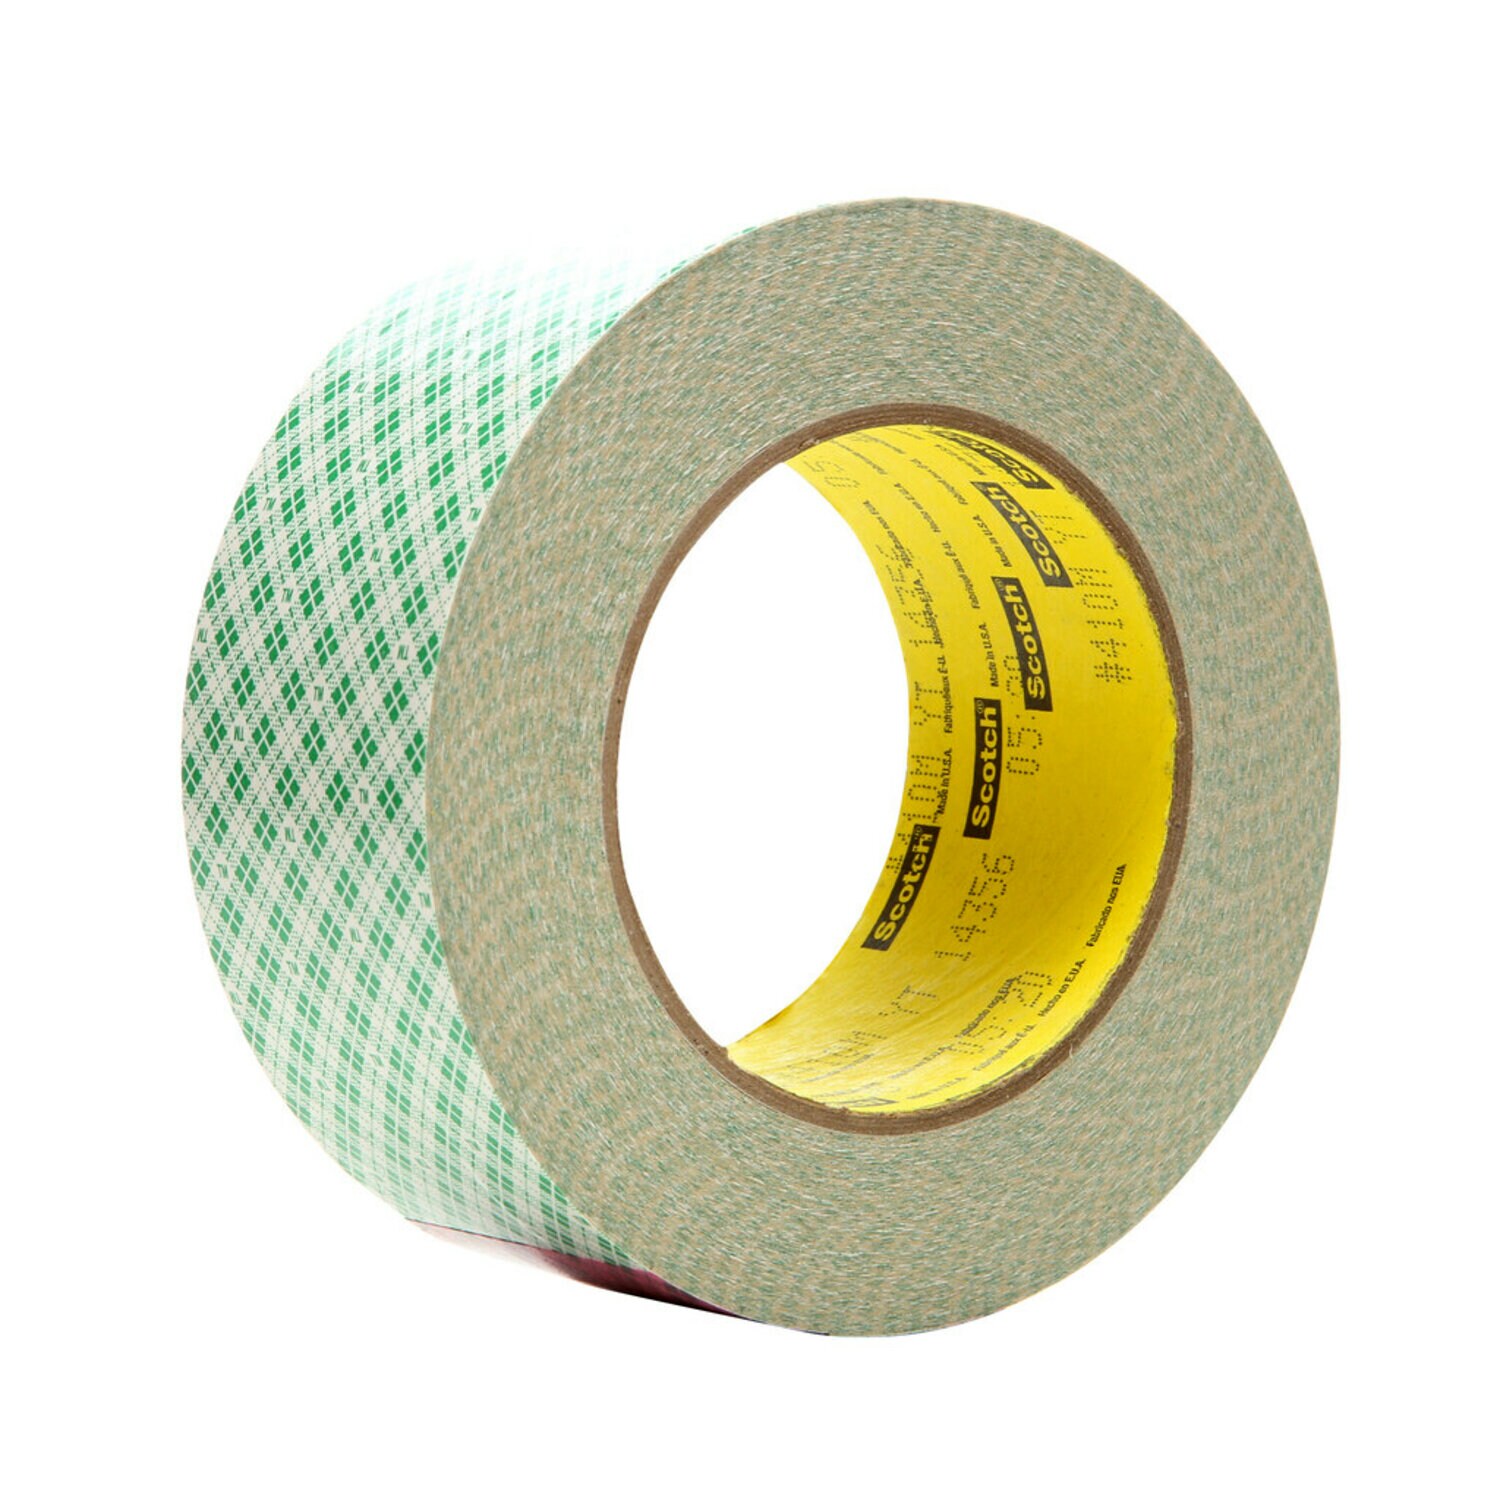 7010300259 - 3M Double Coated Paper Tape 410M, Natural, 2 in x 36 yd, 5 mil, 24
rolls per case